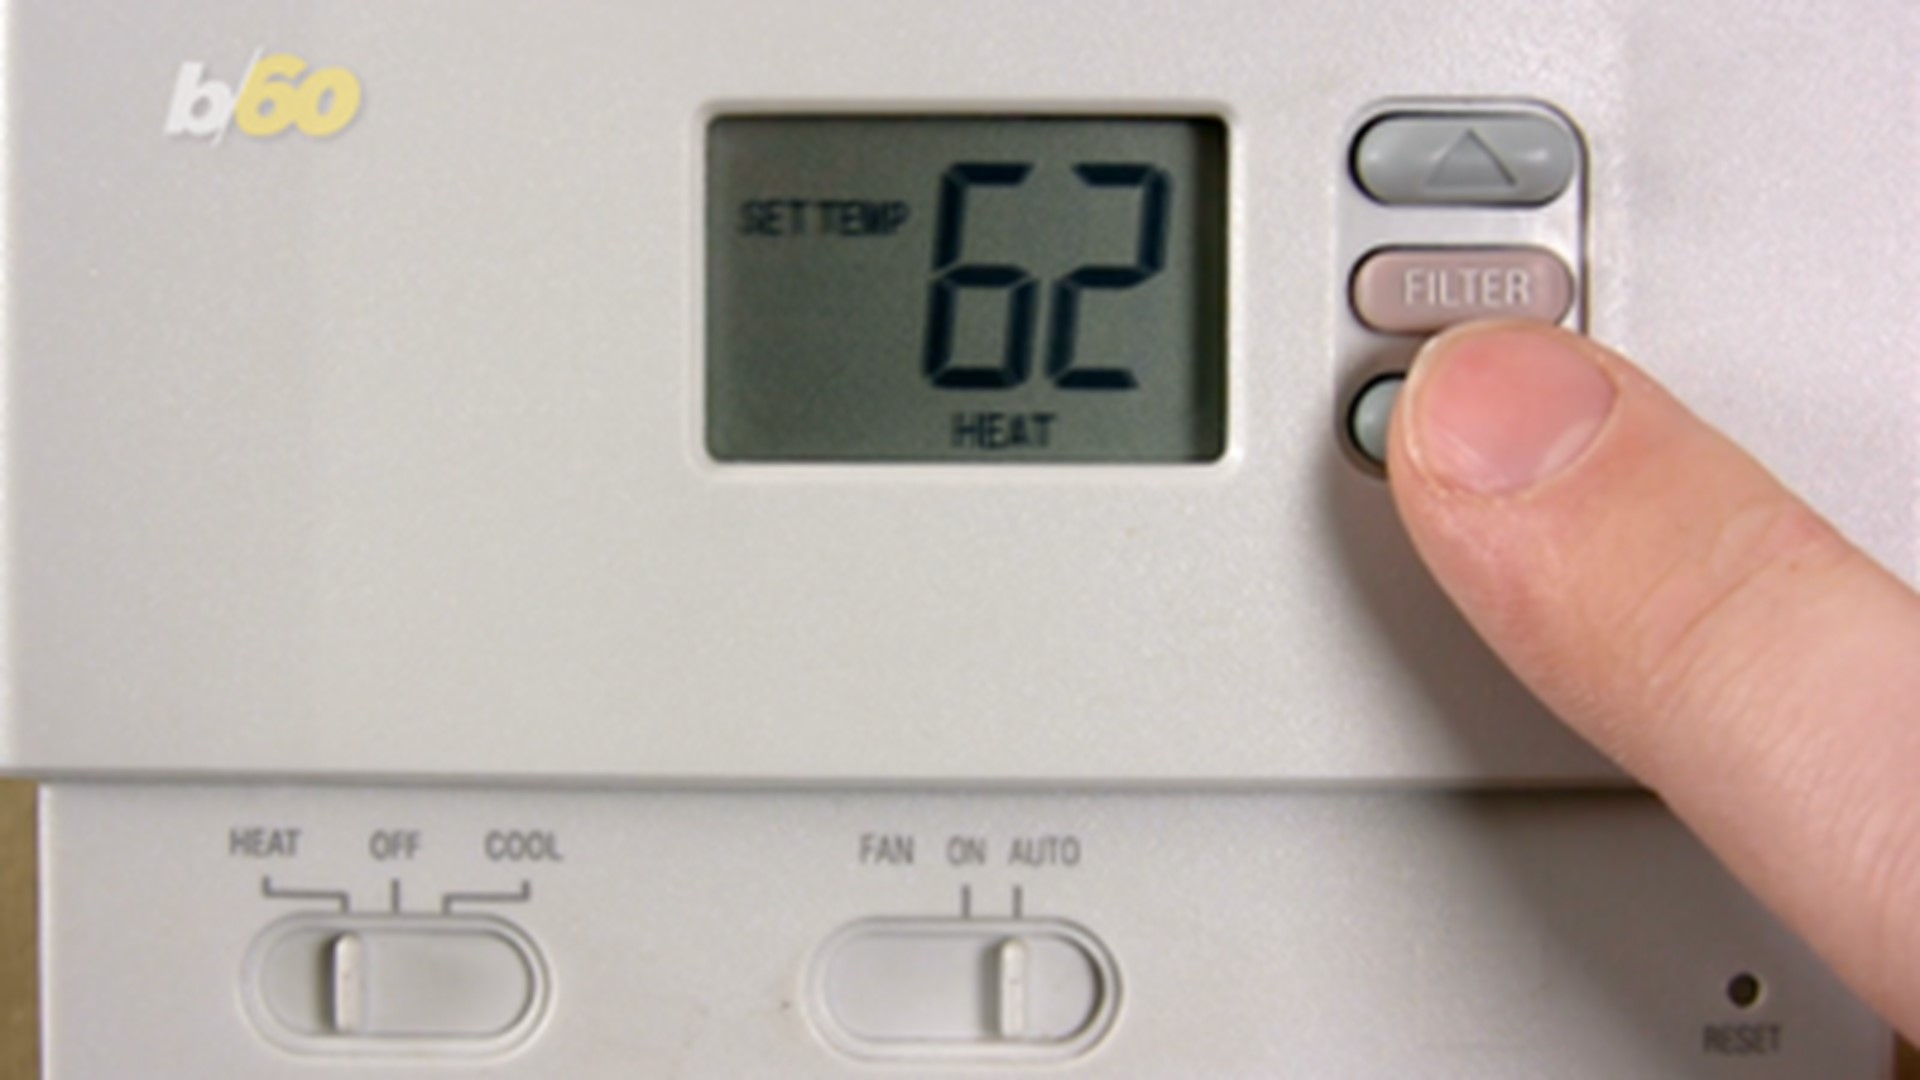 To make sure you're cutting back on the cost of your air conditioner, don't make these simple mistakes when you turn it on. Buzz60's Sean Dowling has more.